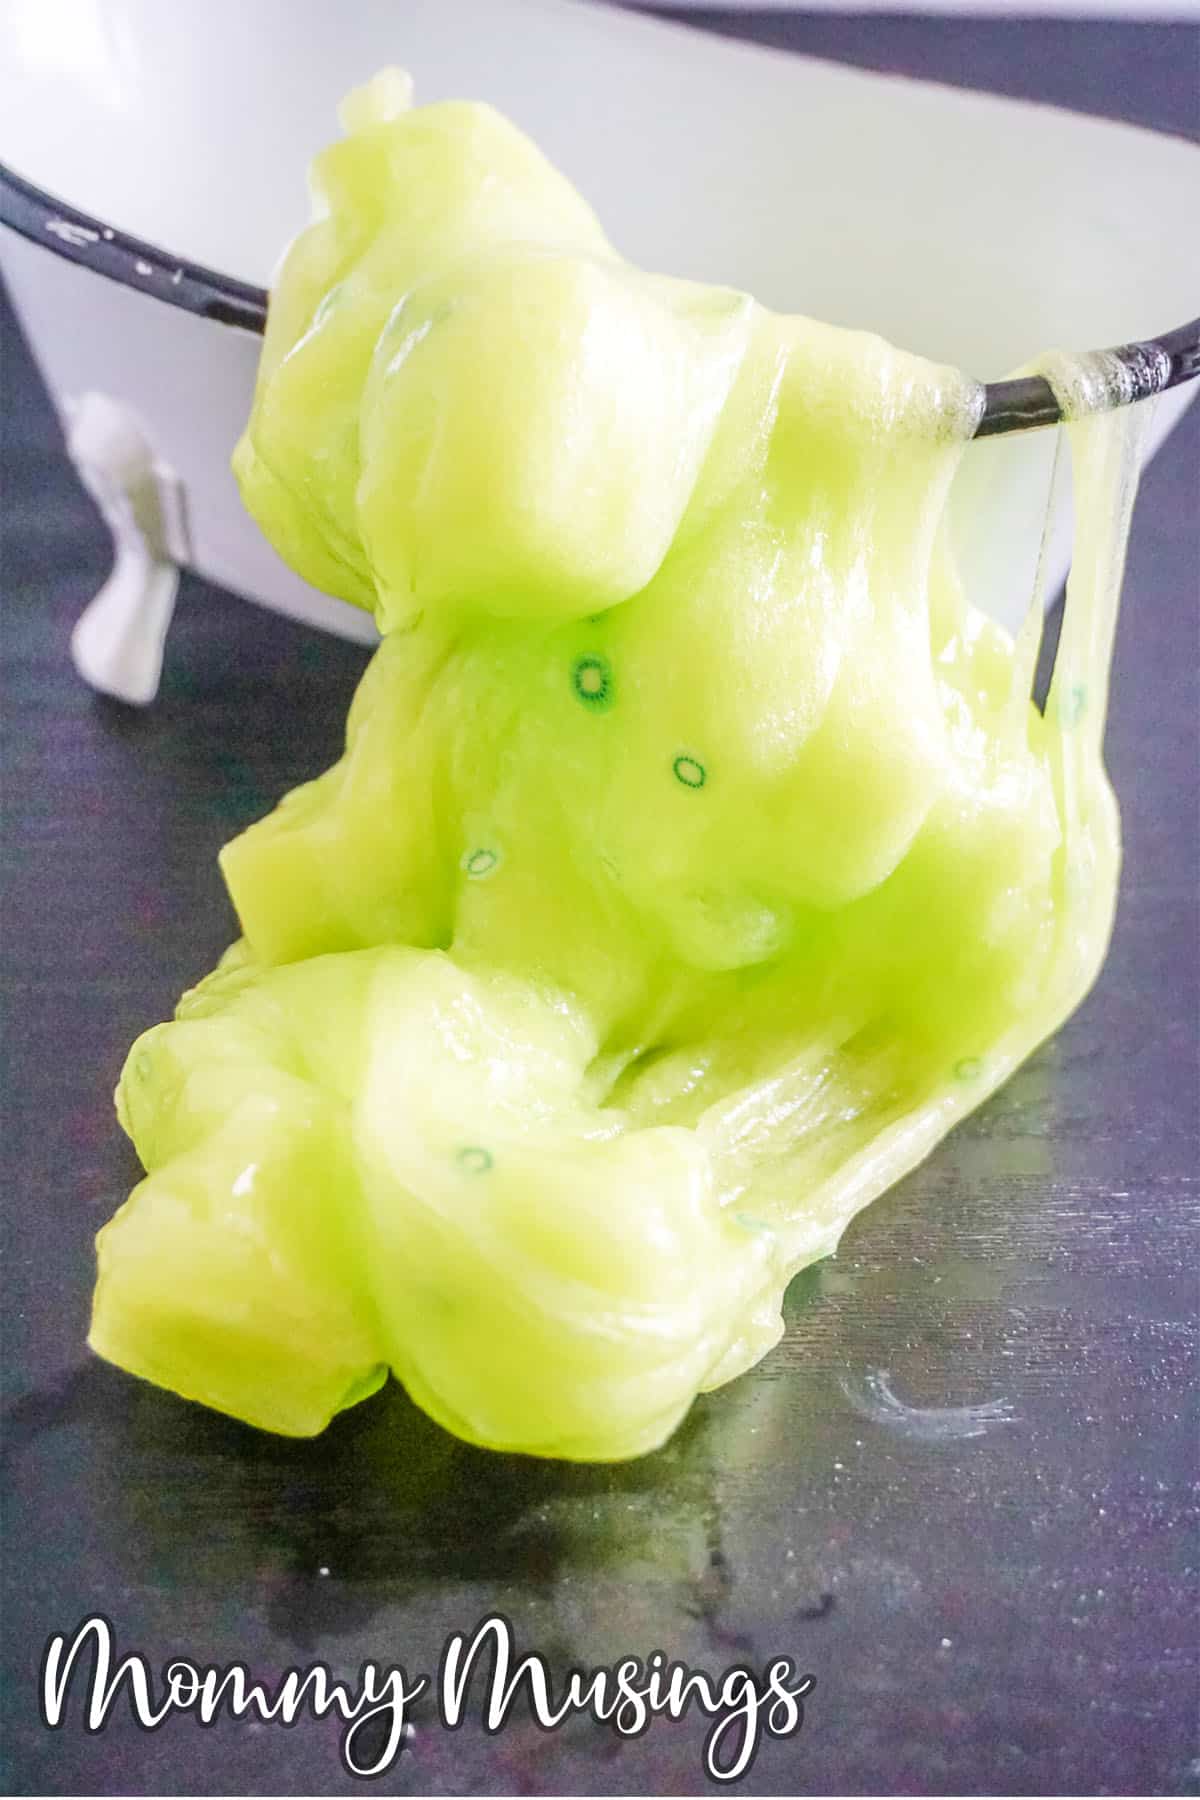 kiwi jelly cube slime spilling onto a table